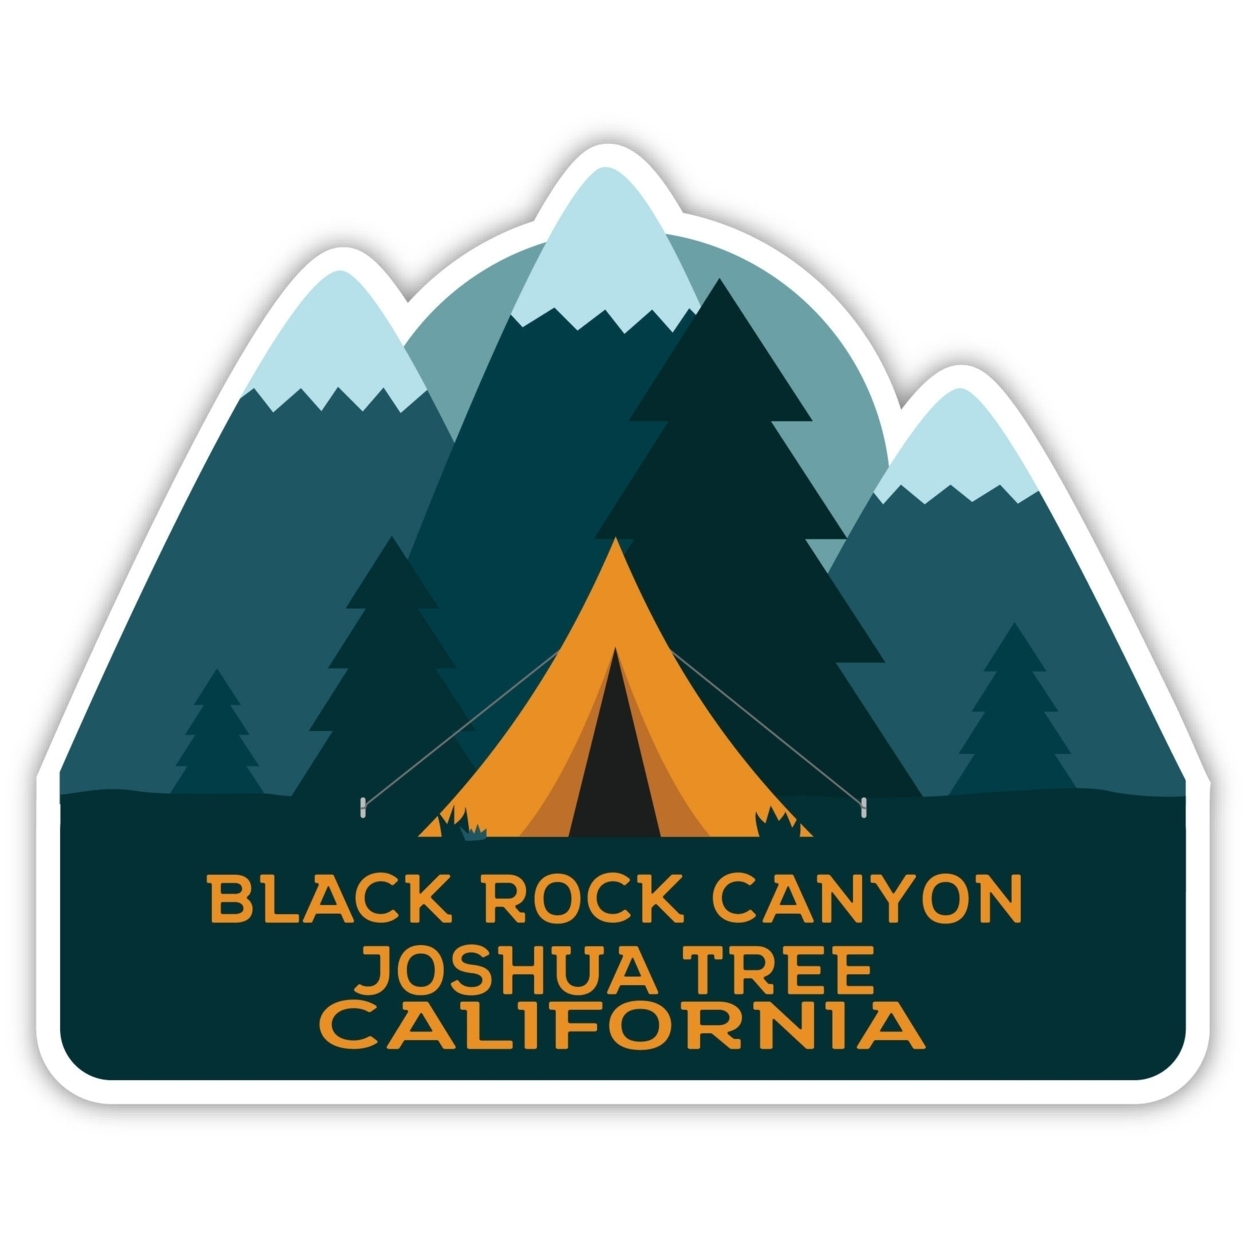 Black Rock Canyon Joshua Tree California Souvenir Decorative Stickers (Choose Theme And Size) - 4-Pack, 12-Inch, Tent